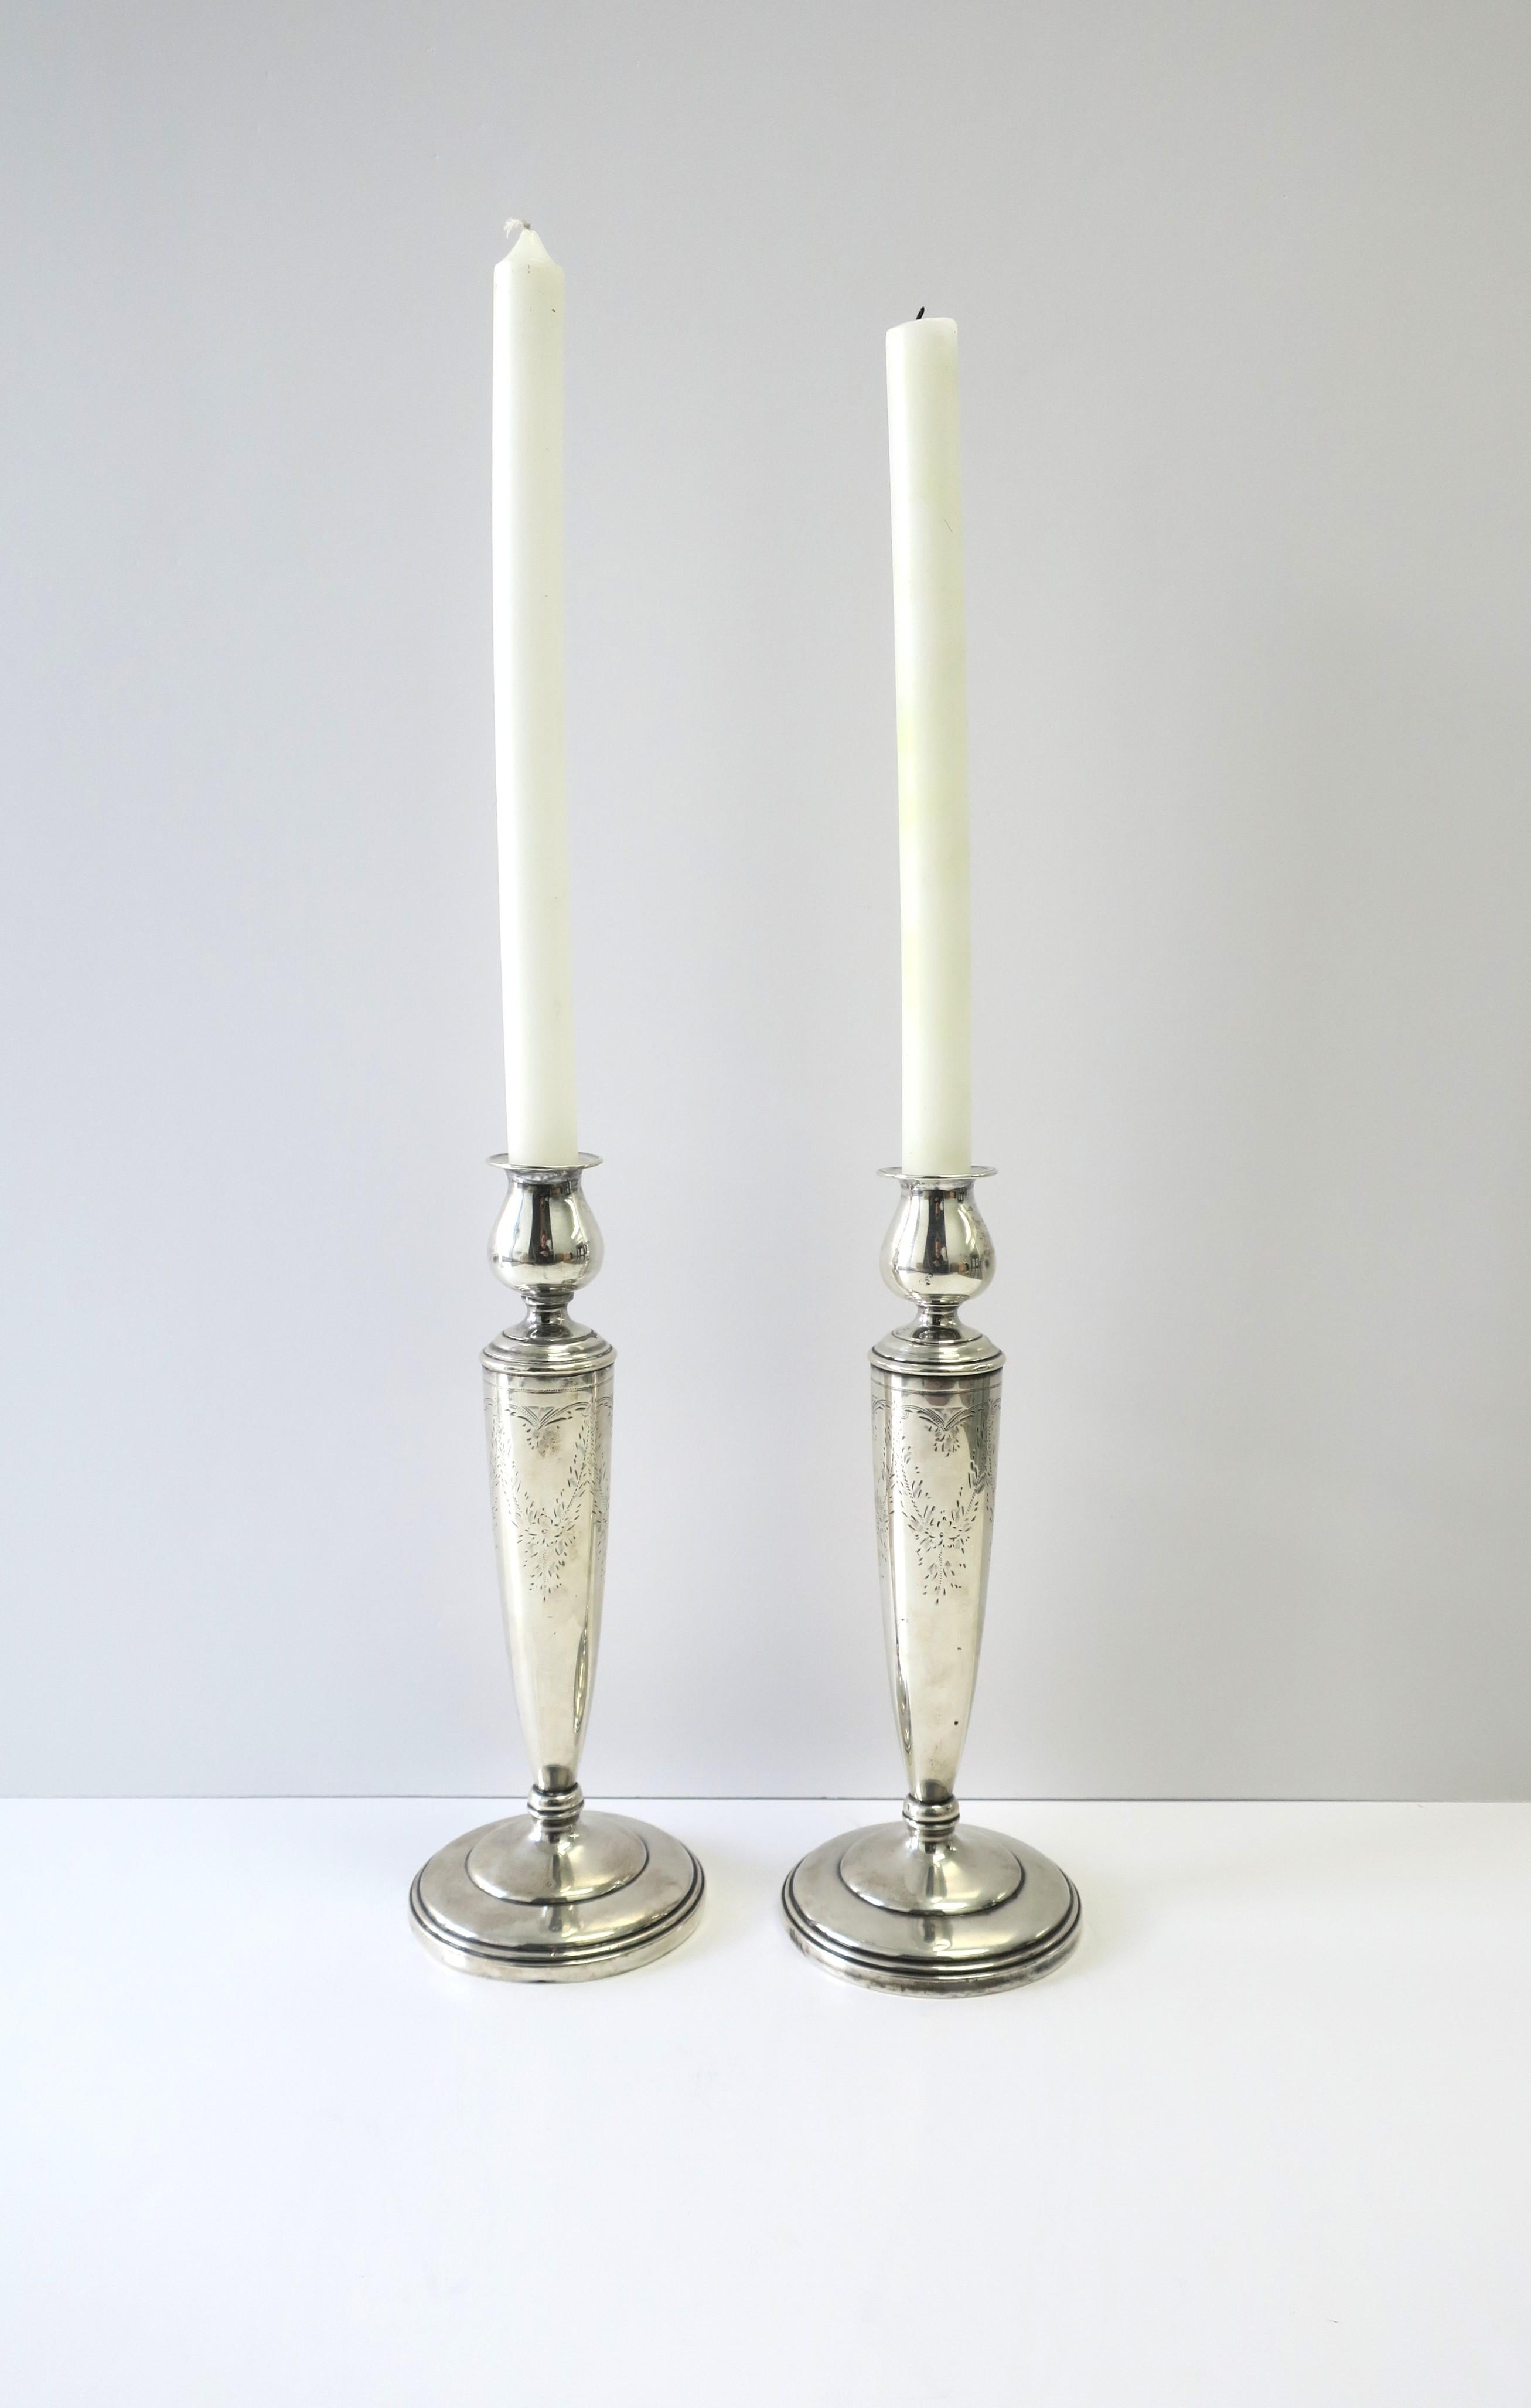 Etched Sterling Silver Candlesticks, Pair